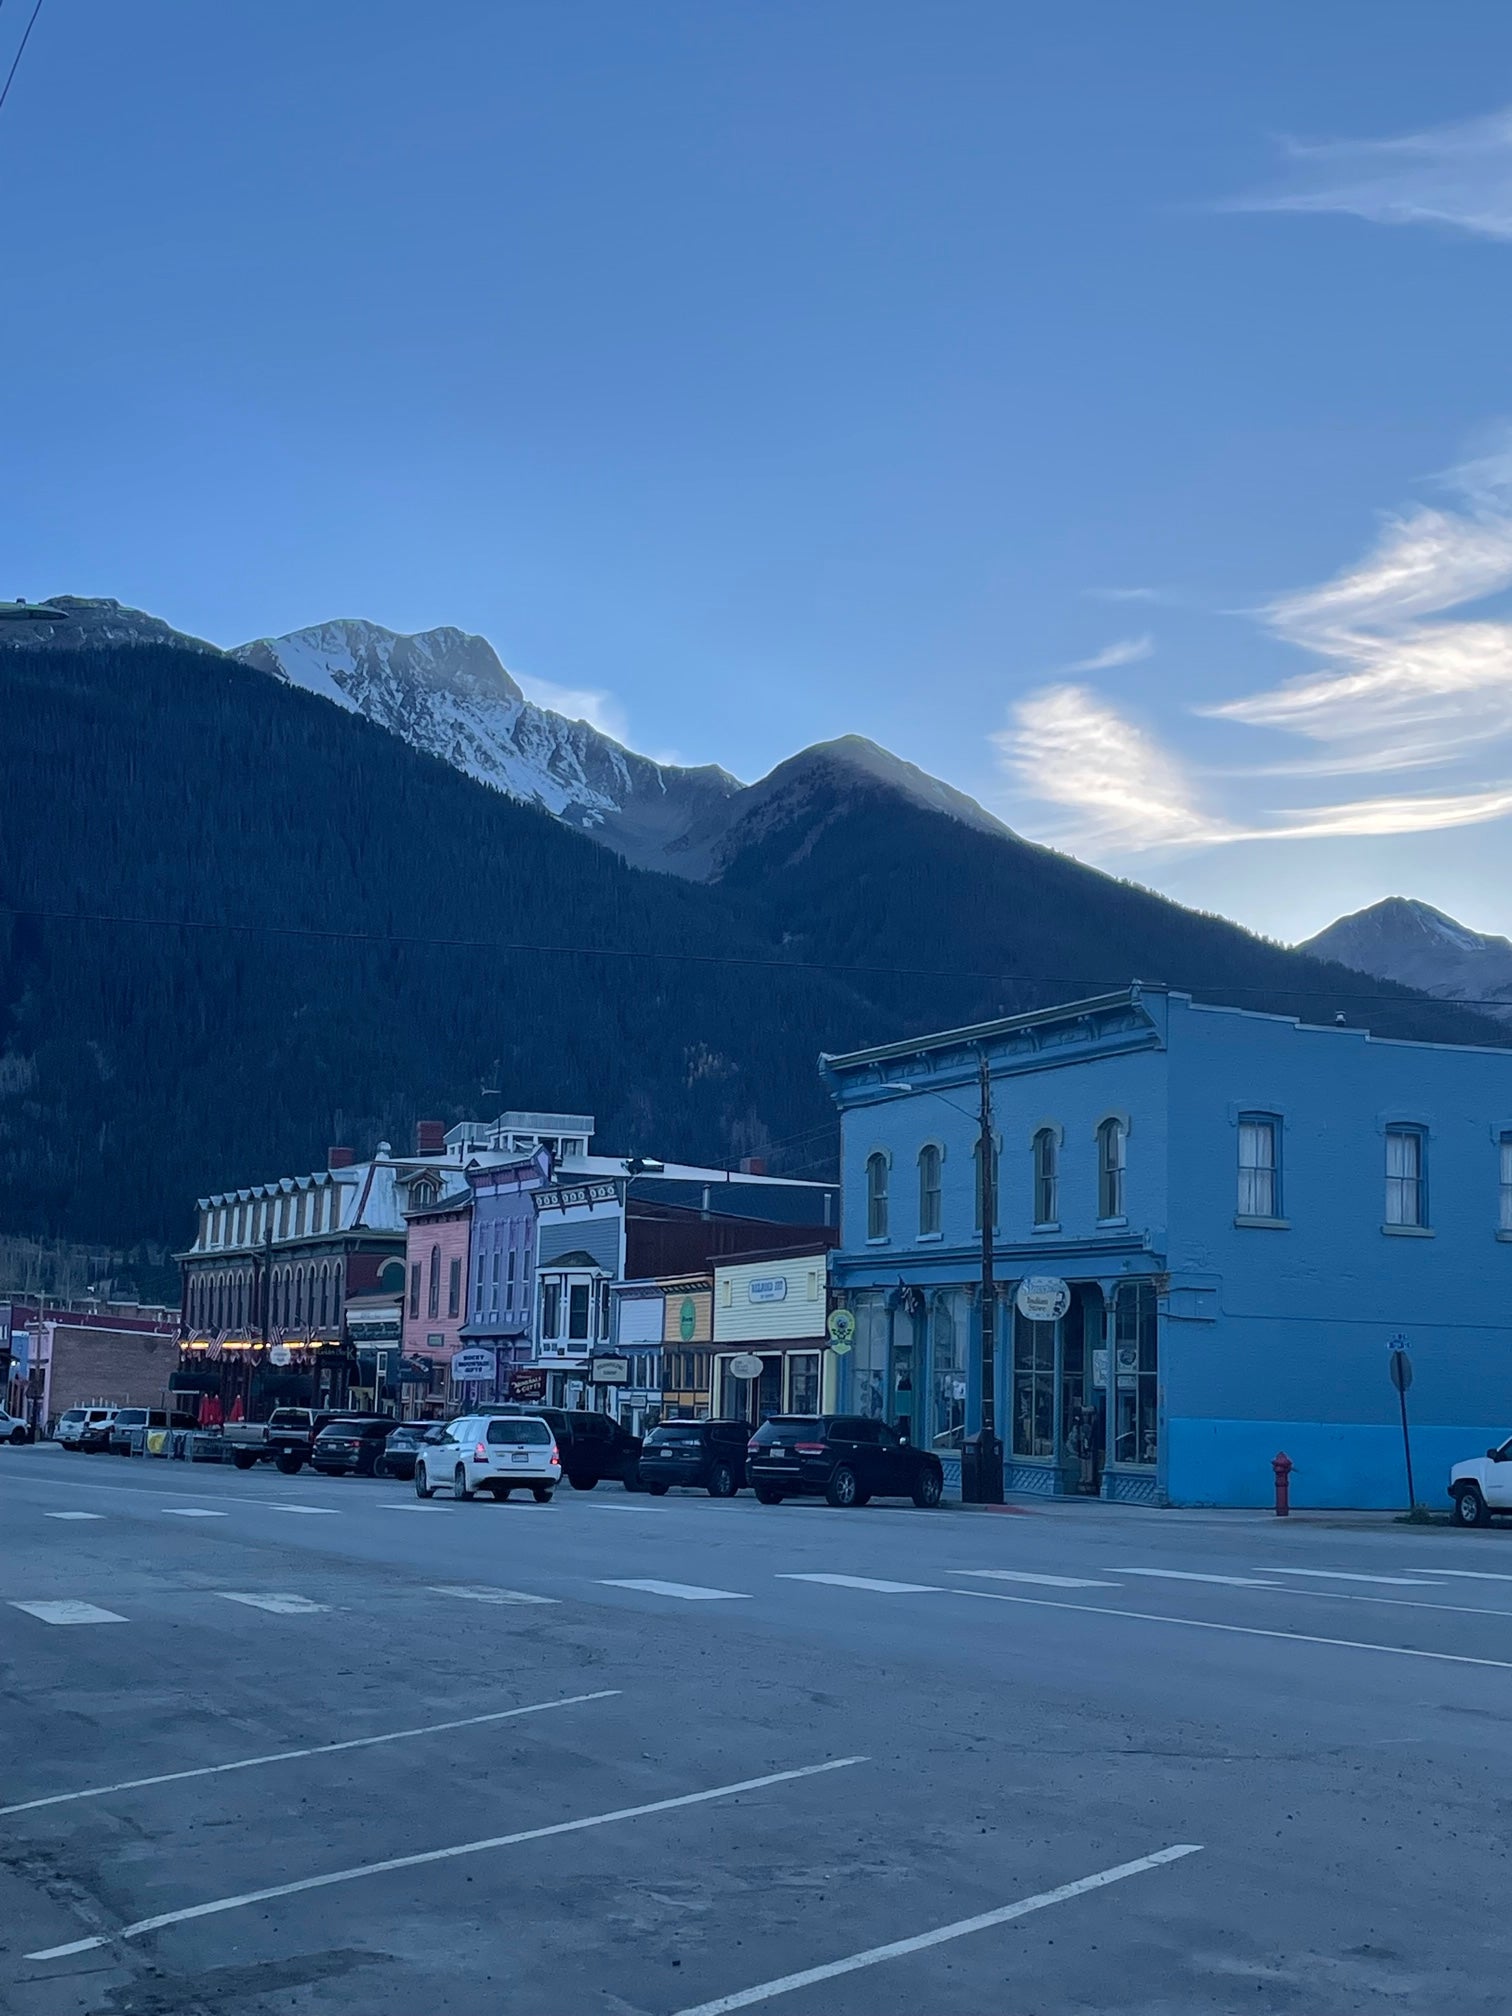 The tiny town of Silverton, Colorado – set against the Rocky Mountains in the southwest of the state – has fewer than 800 year-round residents